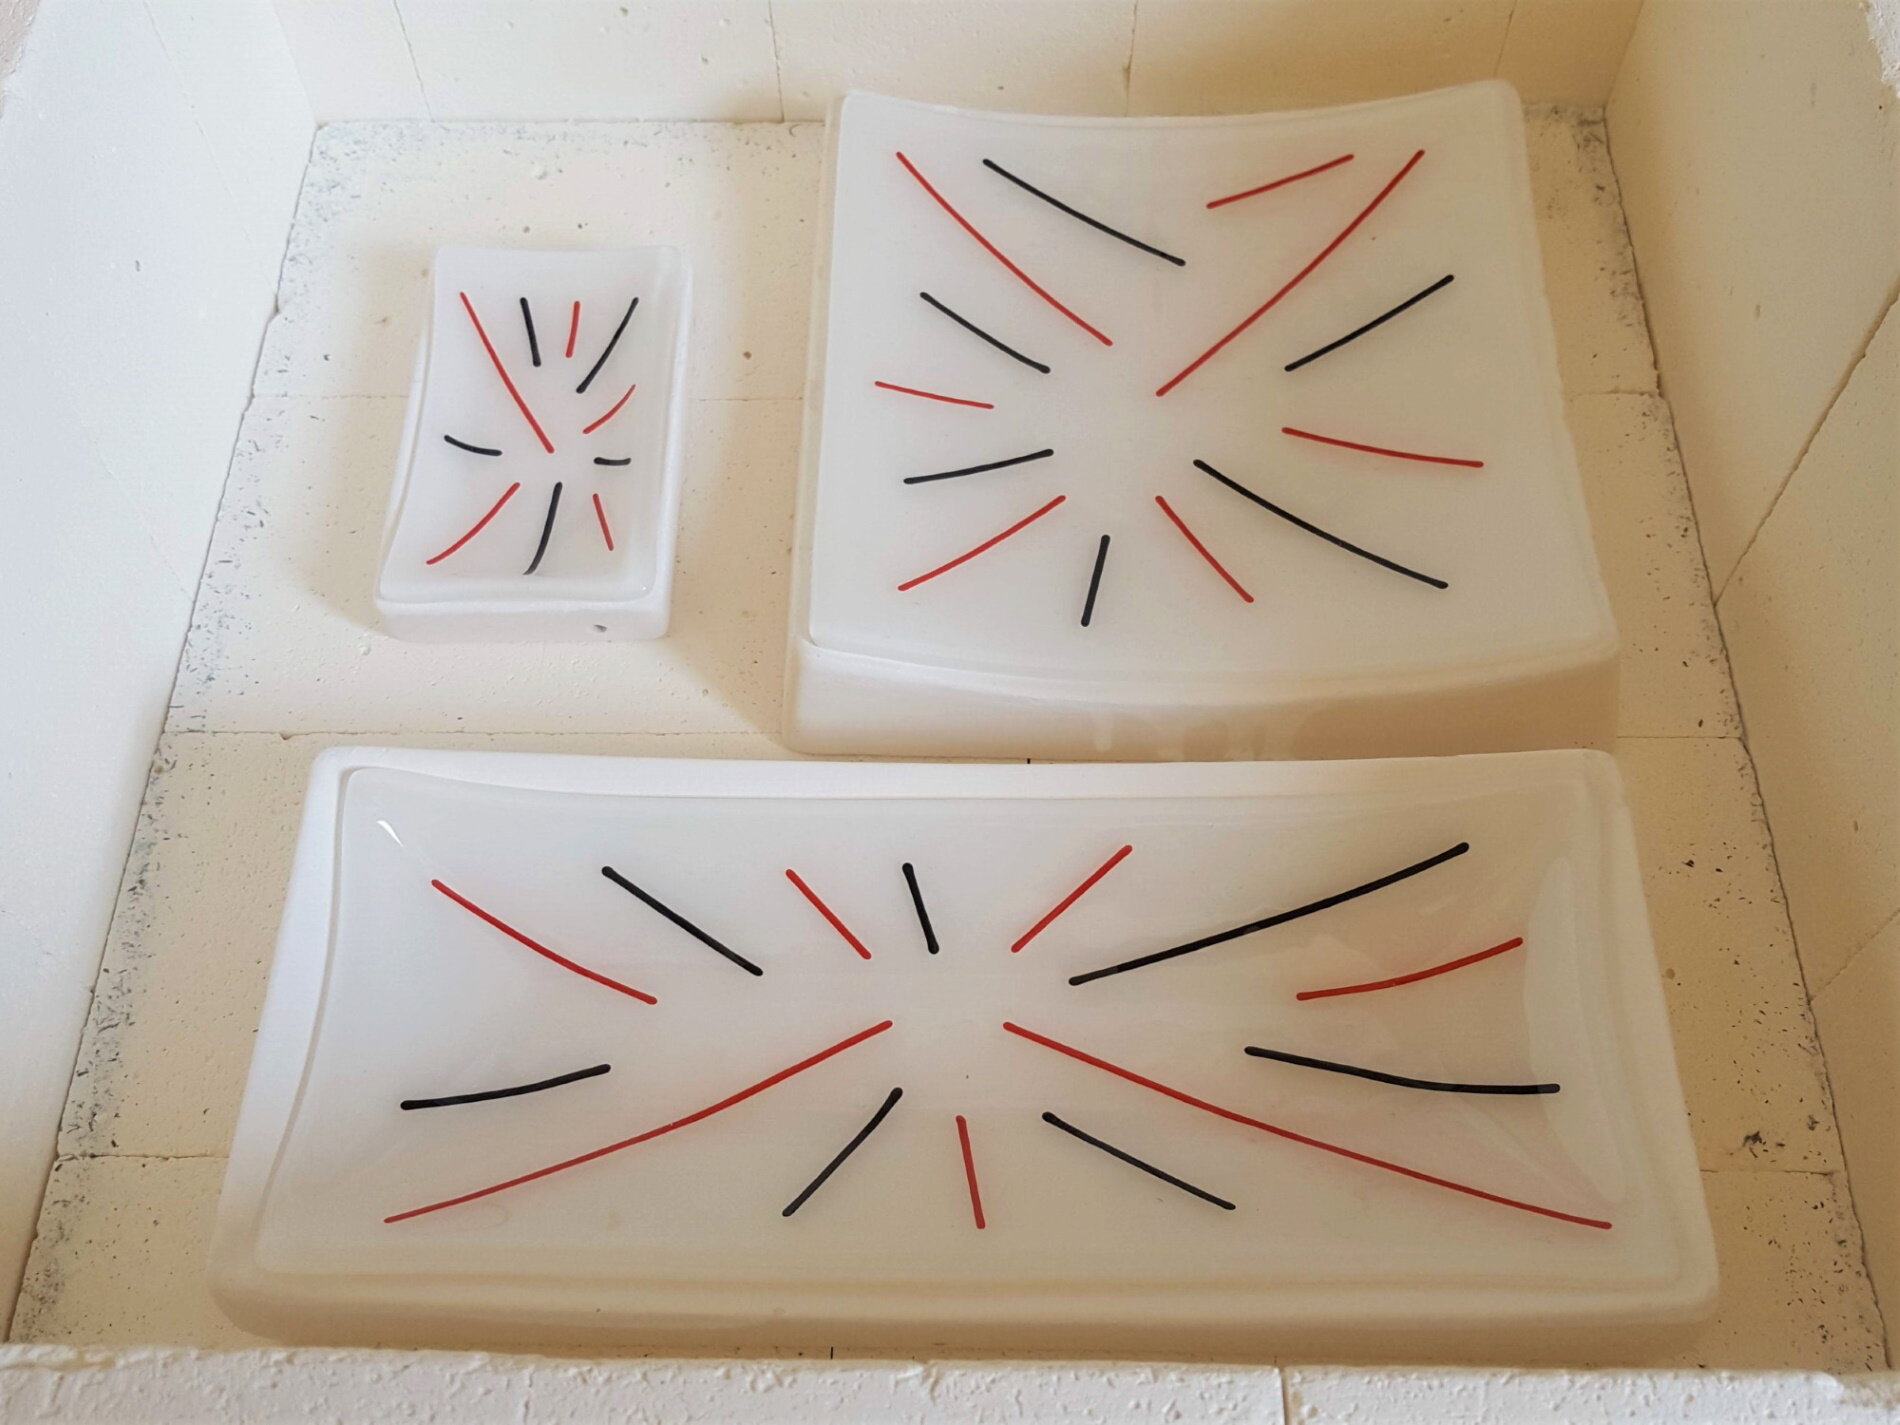 White fused glass homeware pieces.